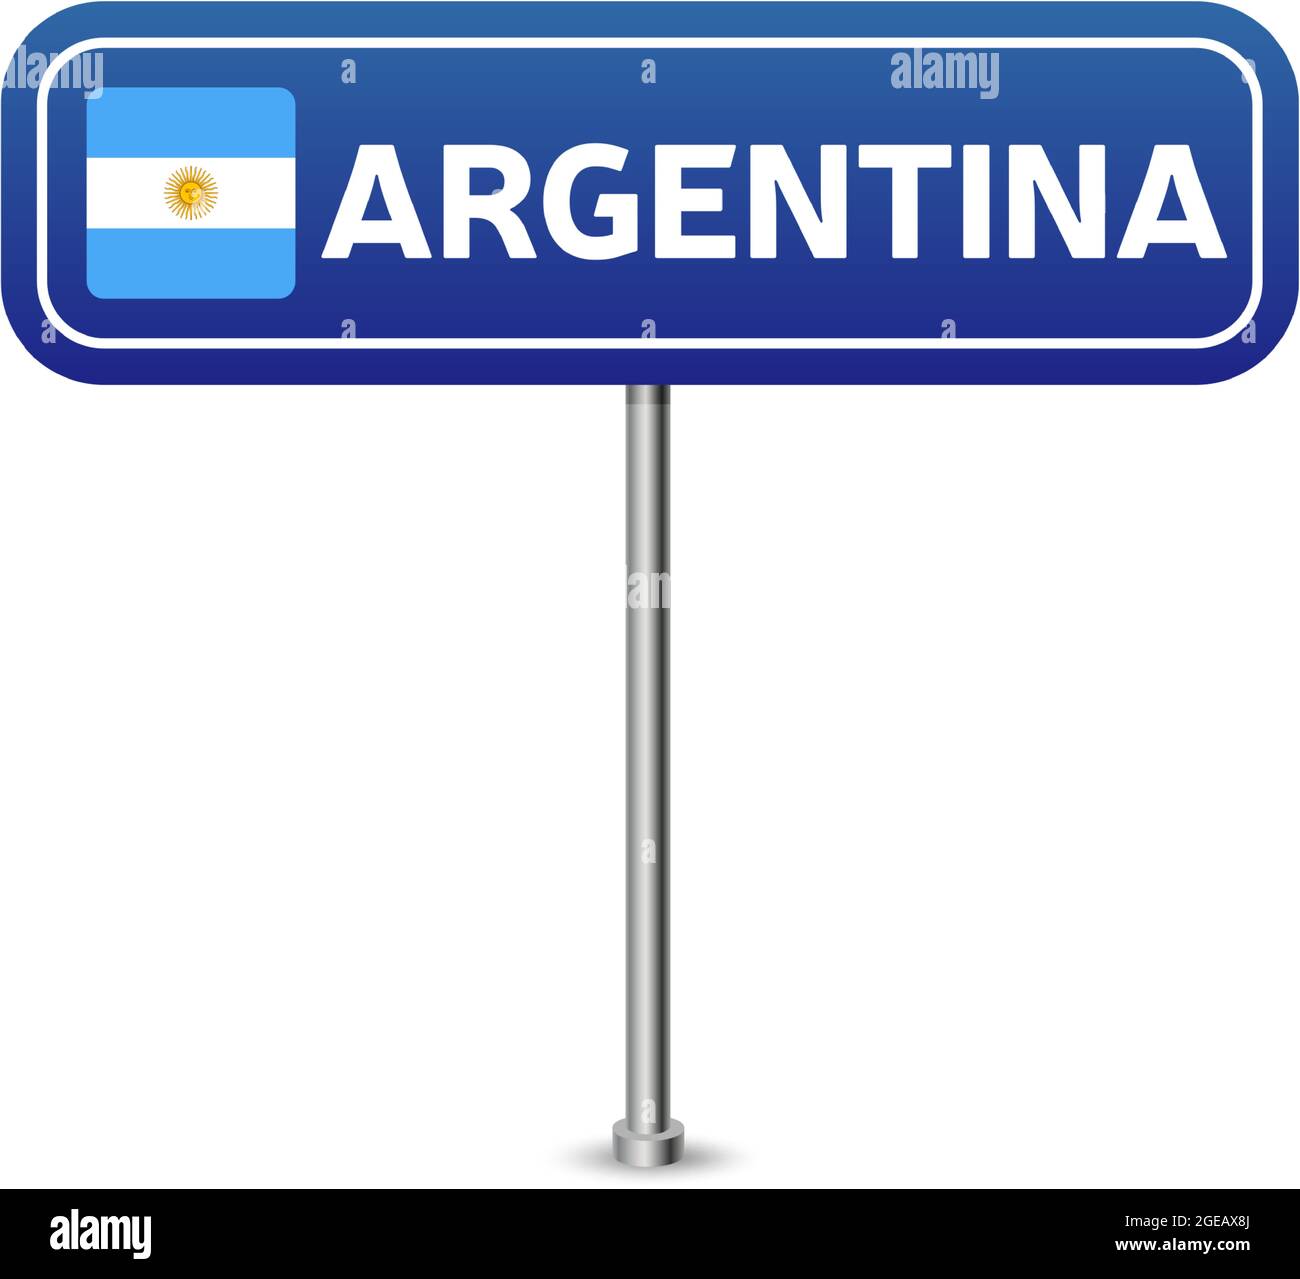 argentina road sign. National flag with country name on blue road 